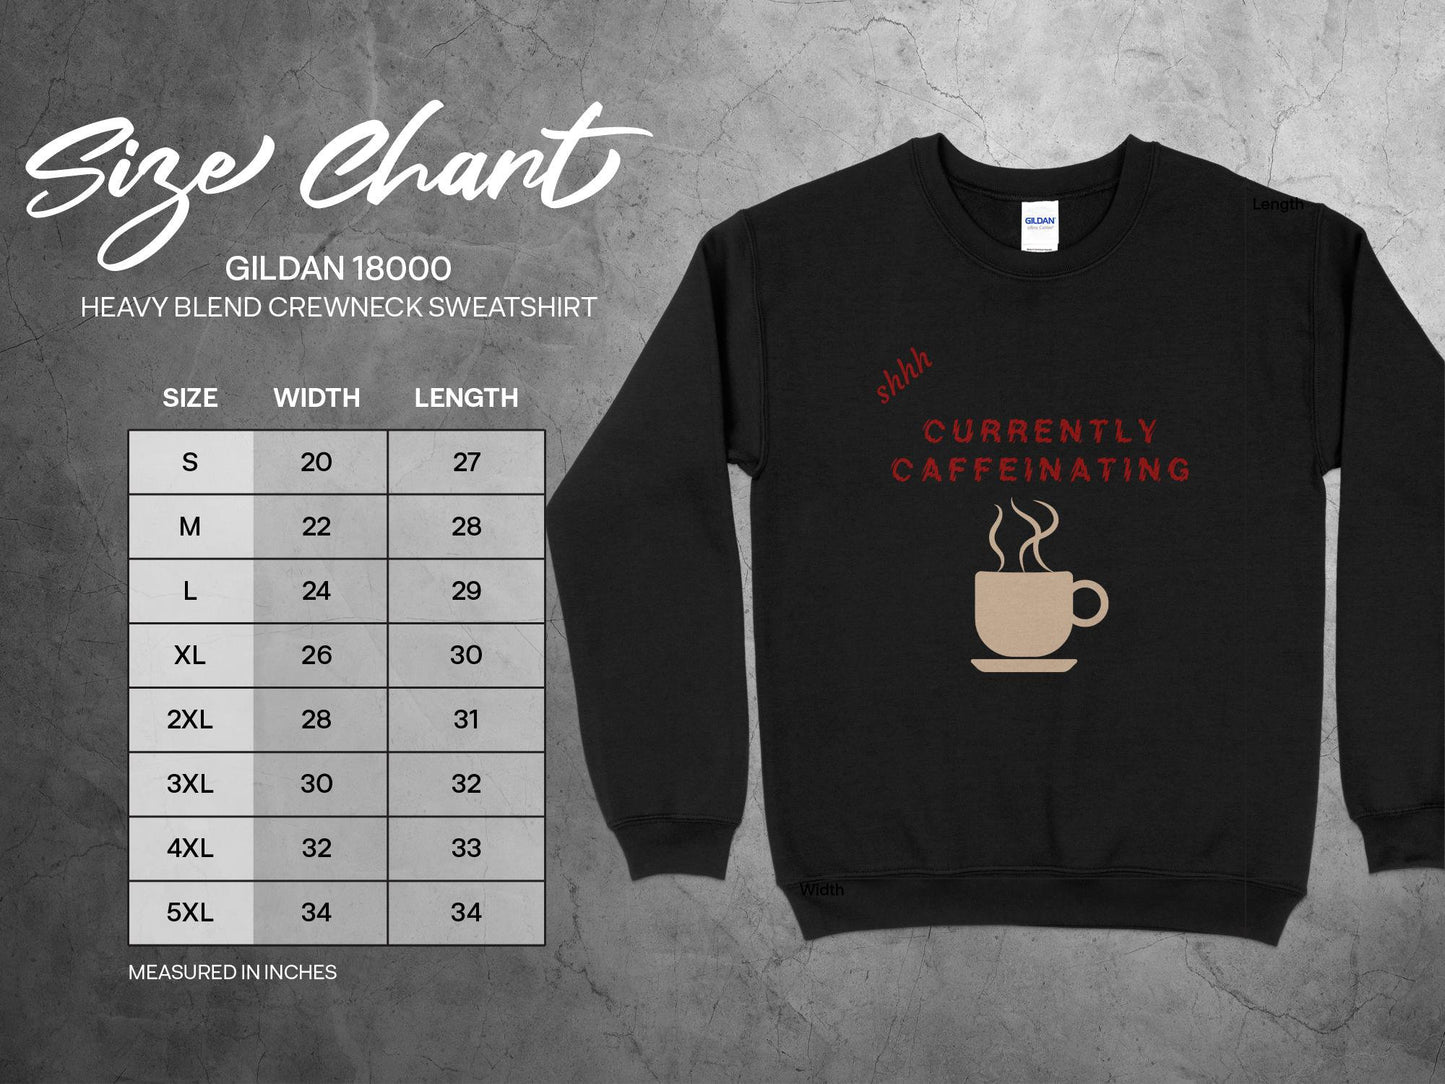 Shh, Currently Caffeinating" T-Shirt - Funny Coffee Lover Tee T-Shirt, Funny Coffee Shirt, Caffeine Shirt, Coffee Lover Shirt